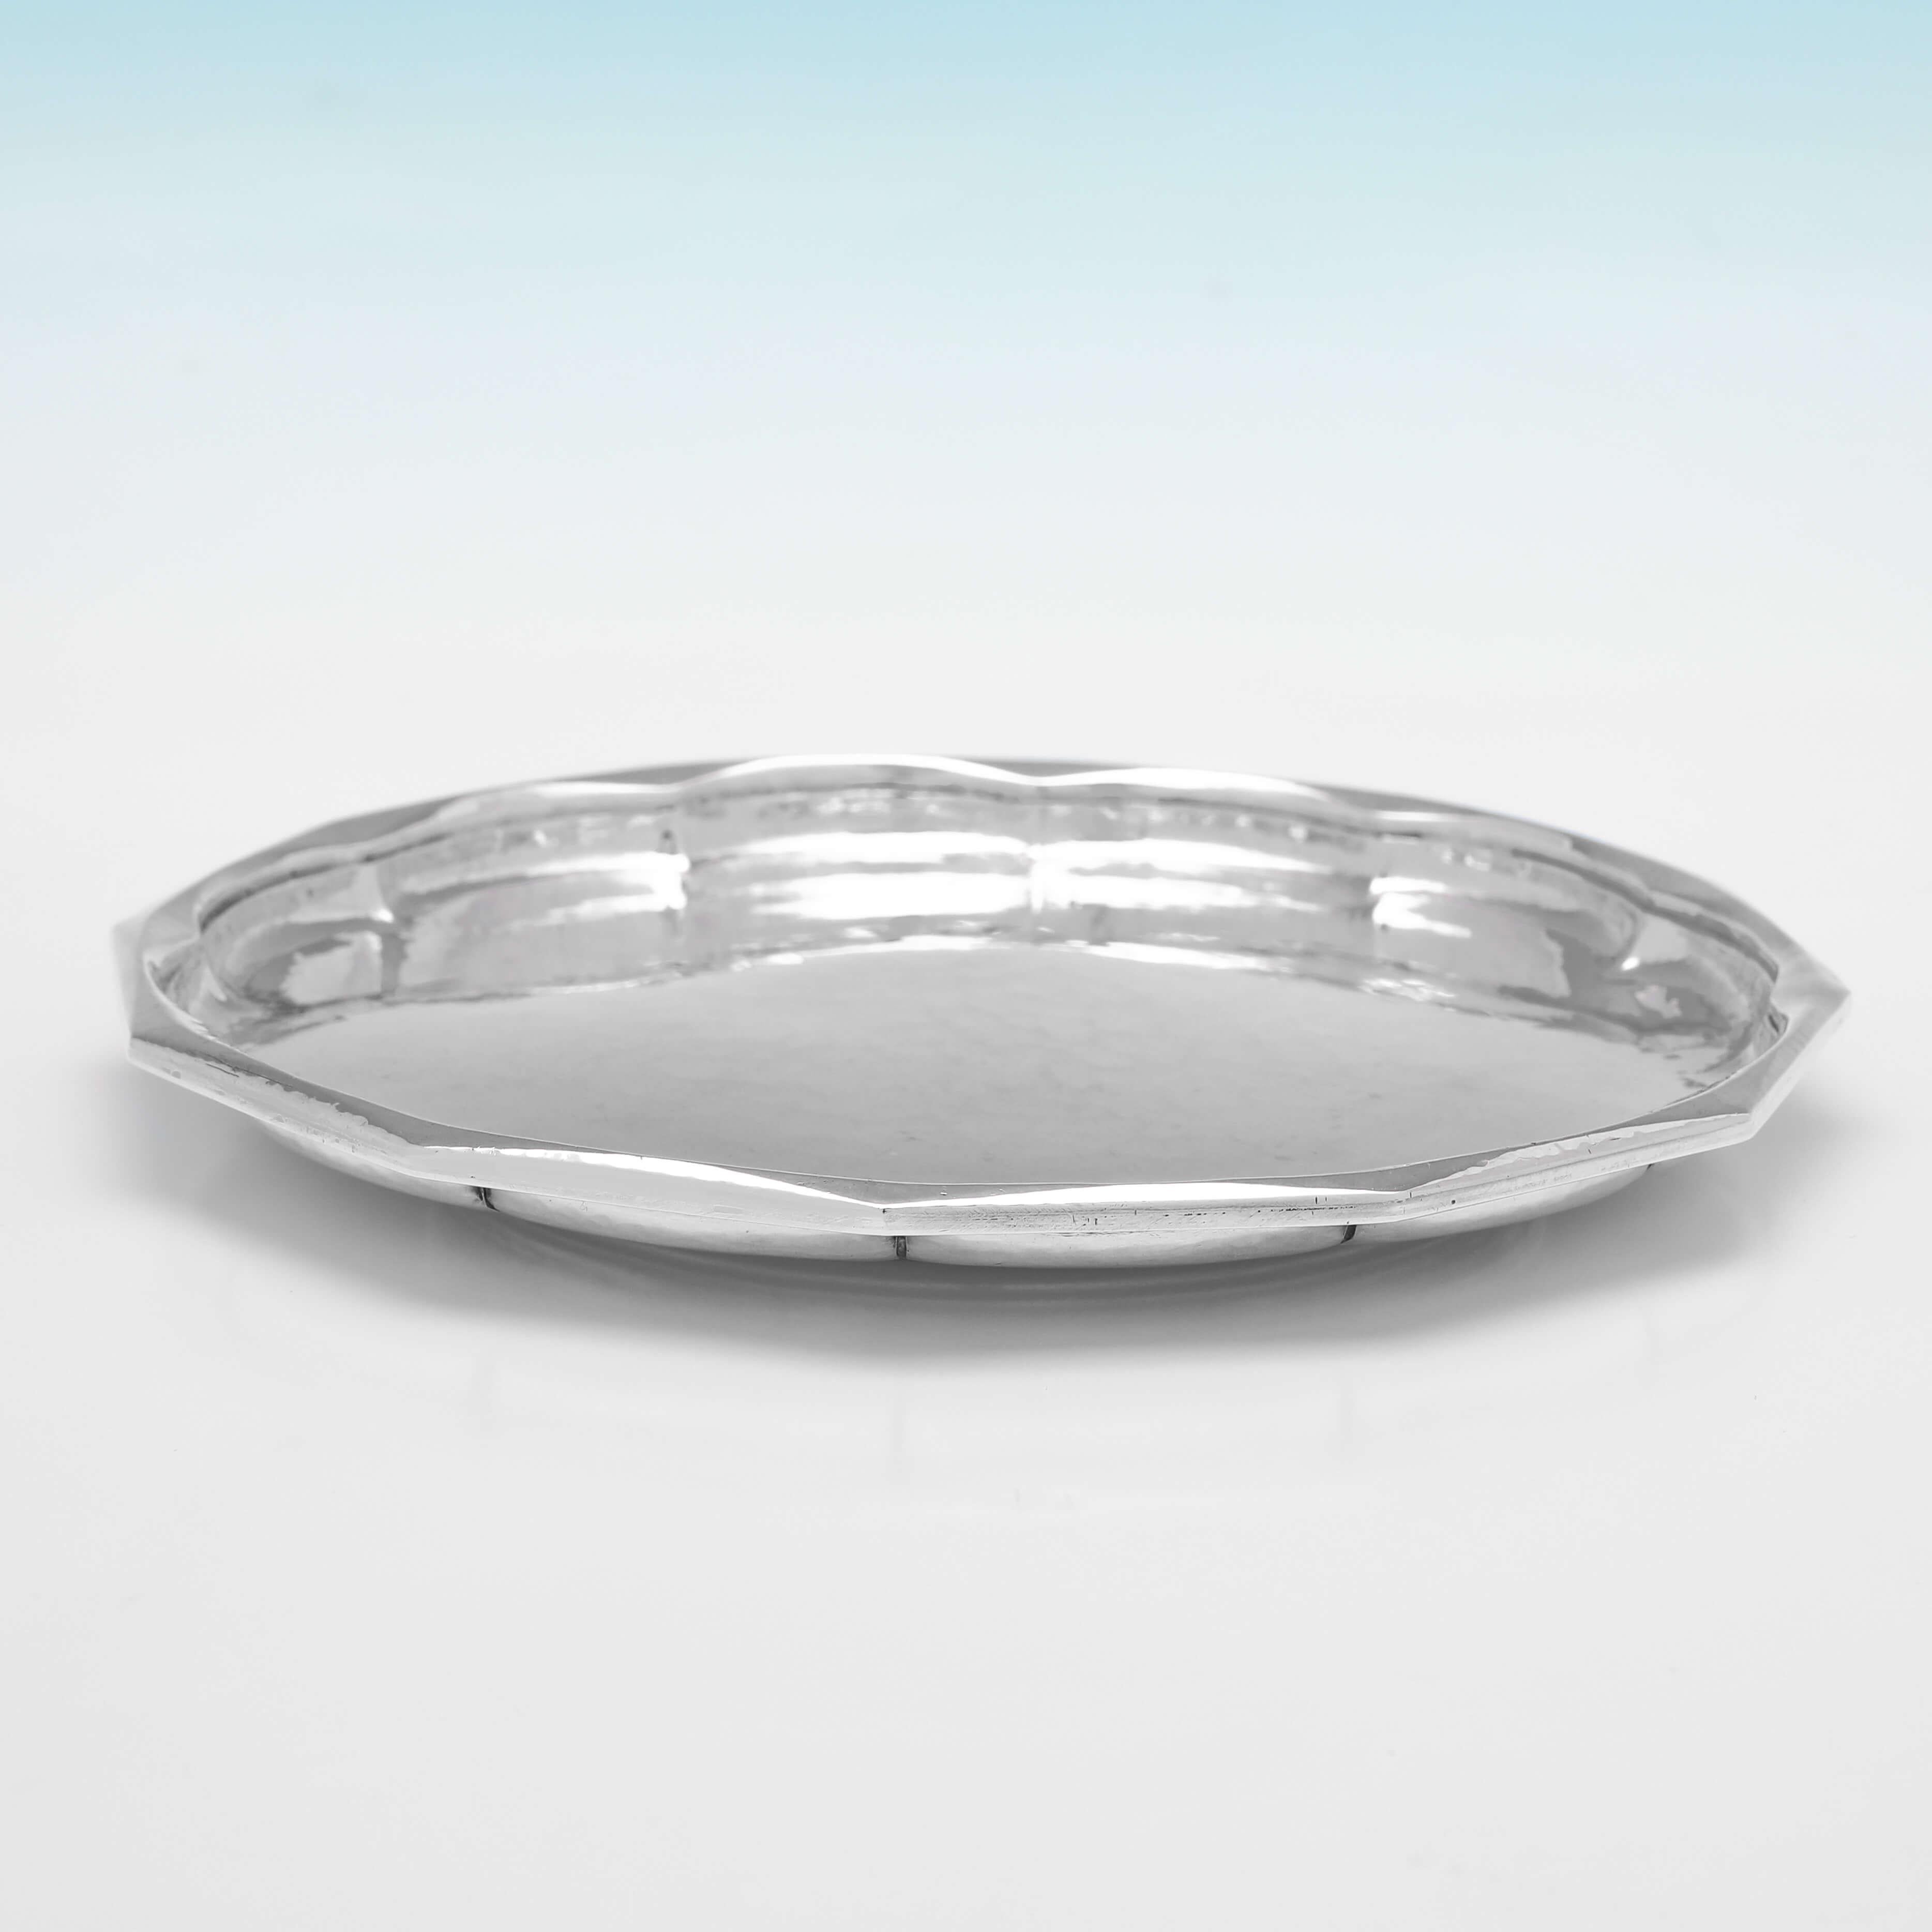 English Omar Ramsden Me Fecit - sterling silver dish in the arts & crafts style - 1934 For Sale